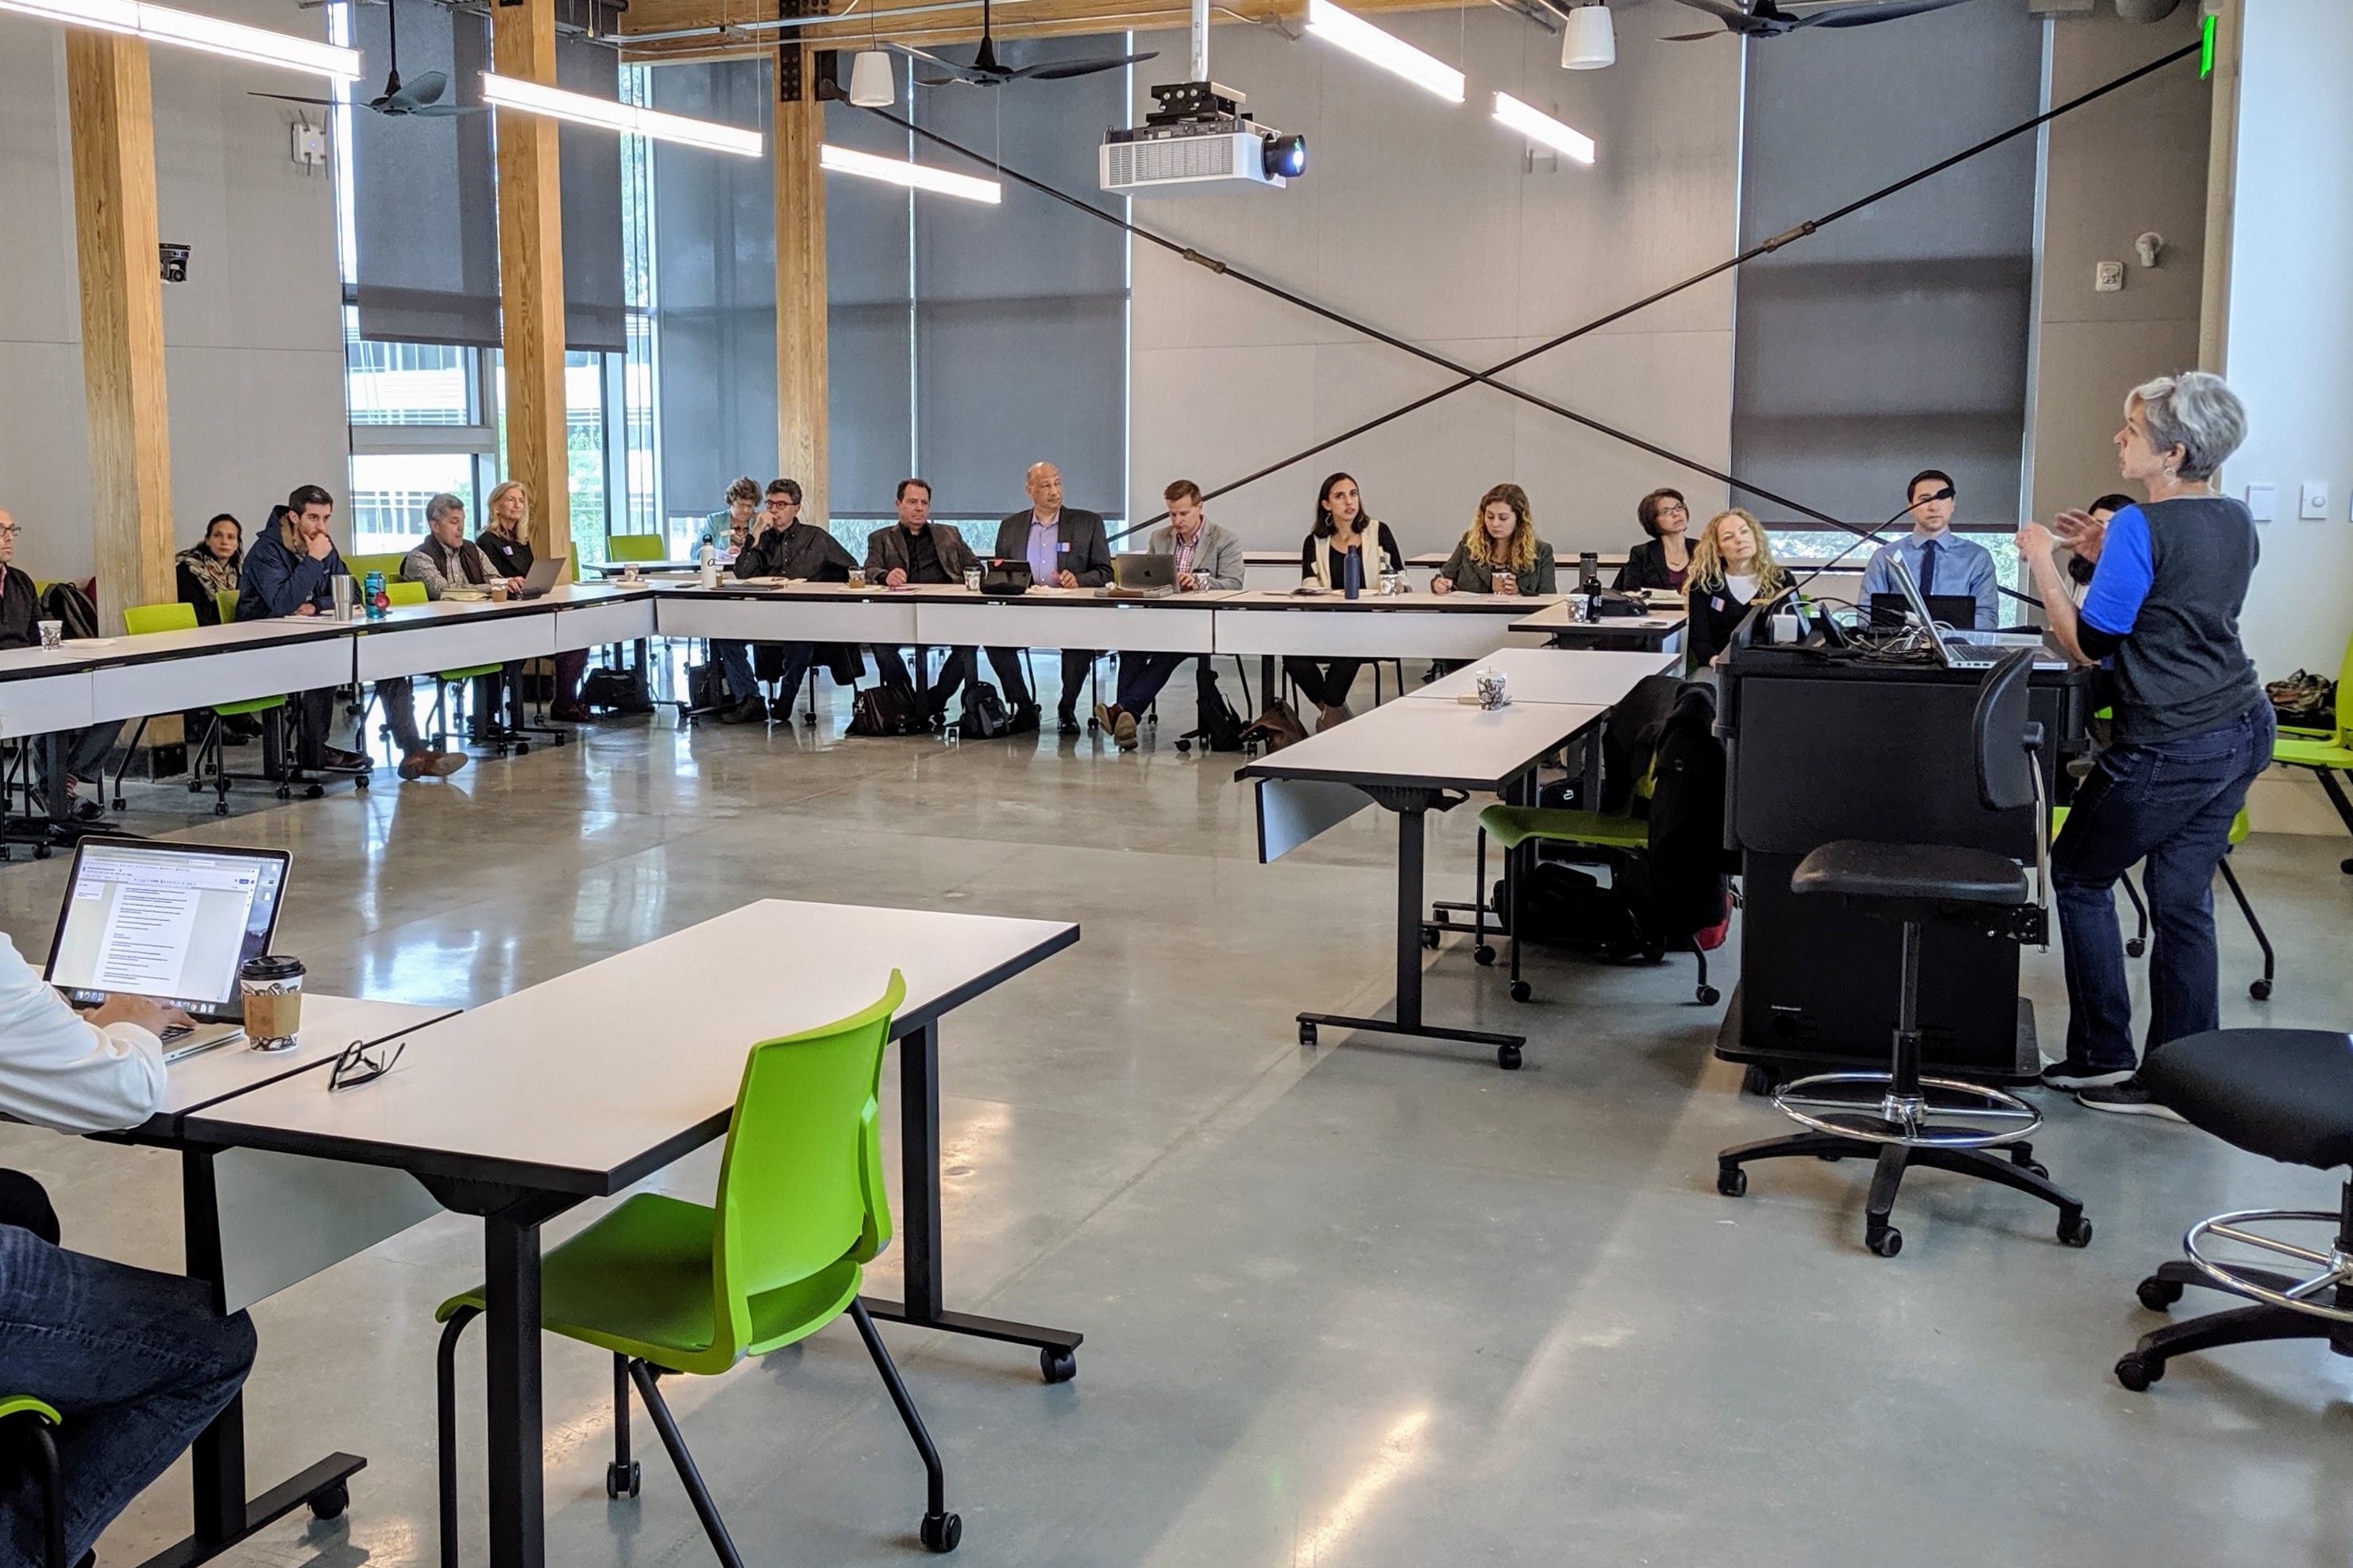 A climate symposium being held in one of the building's classrooms.